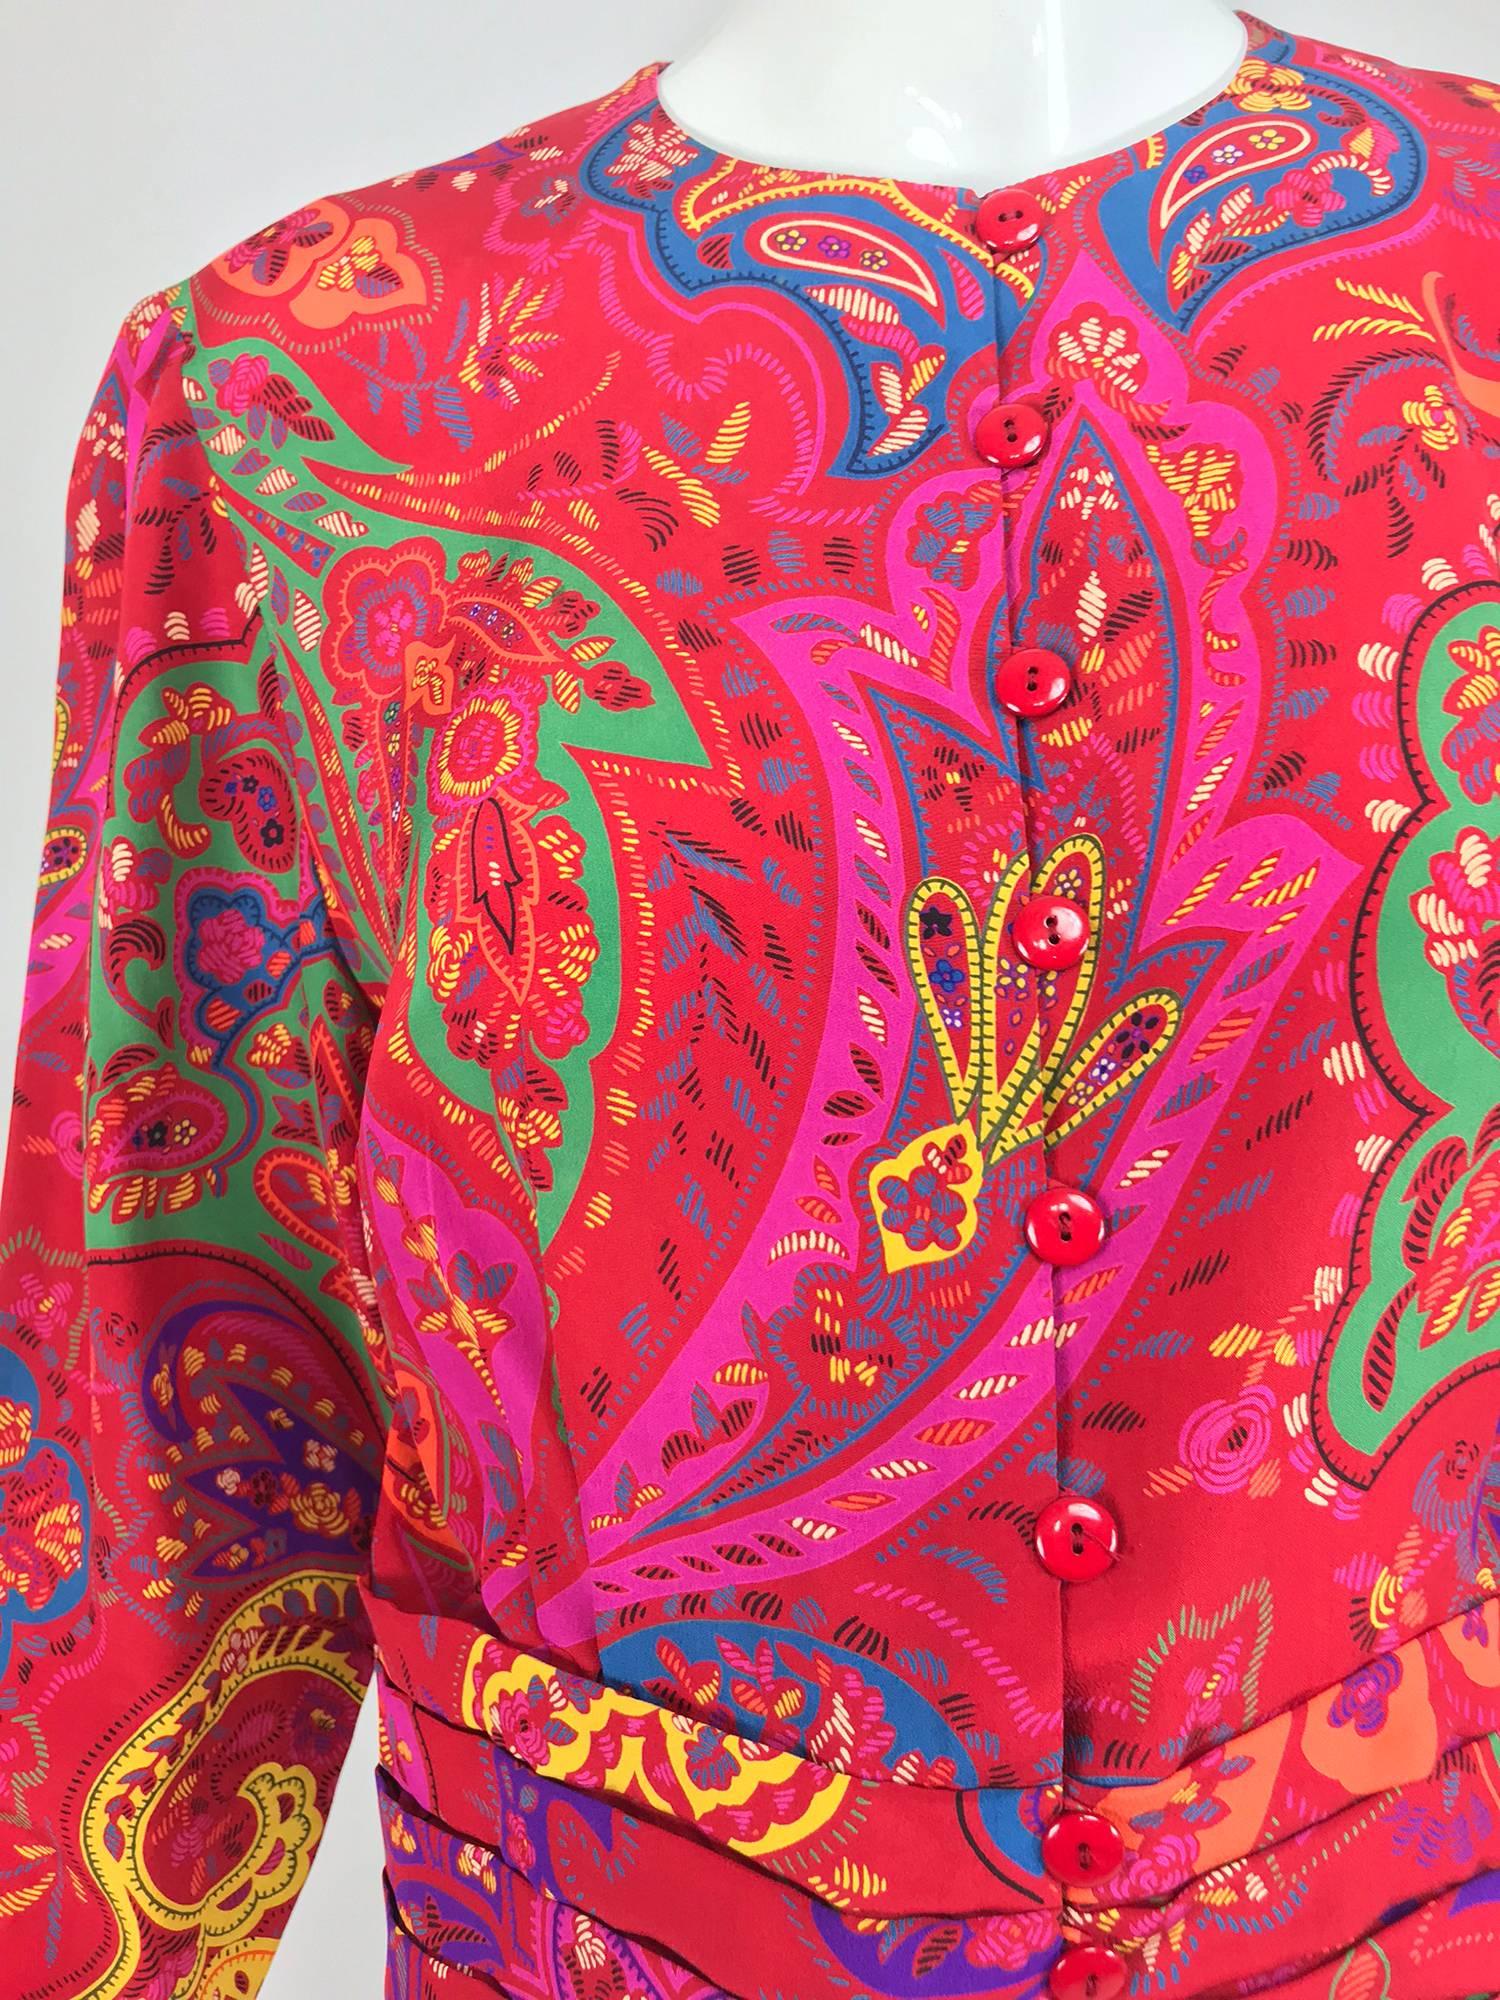 Lanvin silk paisley print top from the late 1980s...Amazing print in bright bold colours, wear this as a top or unlined jacket...Jewel neckline, red buttons close at the front with loops, the long sleeves and fitted waist are pleated...Marked size